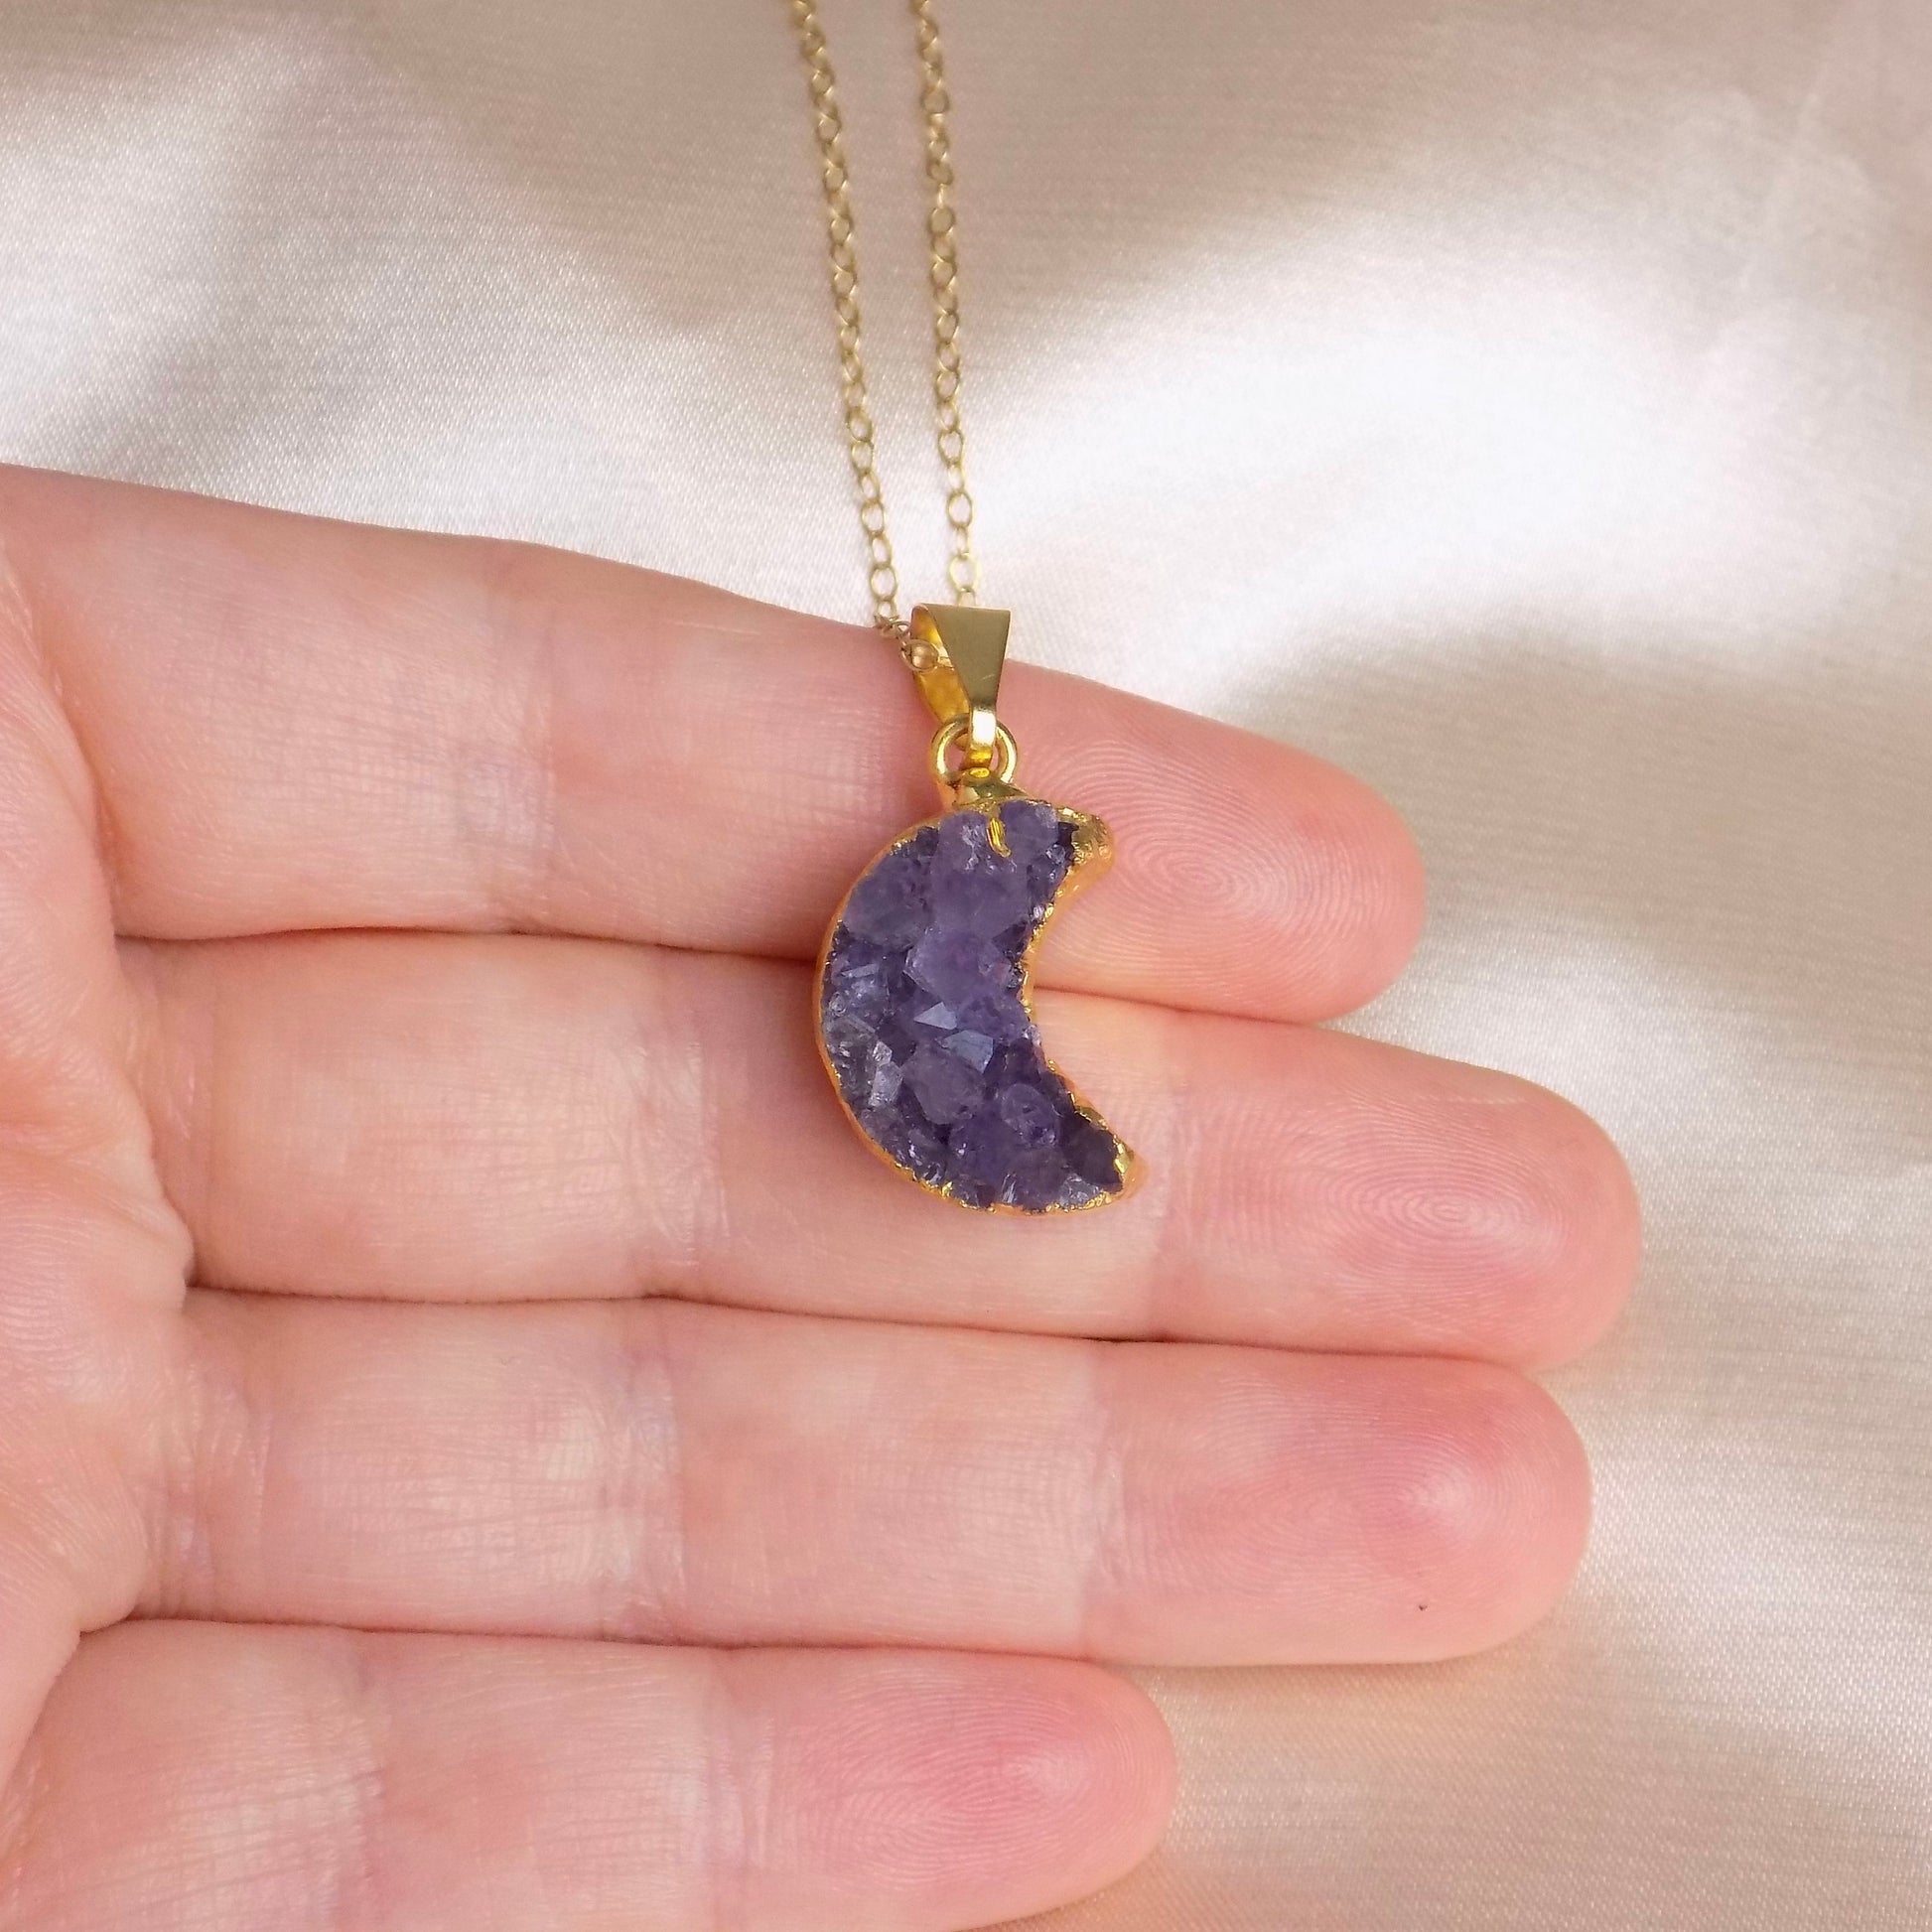 Amethyst Moon Necklace Gold, Crescent Moon Pendant, Purple Druzy Charm, Gifts For Women, R14-51